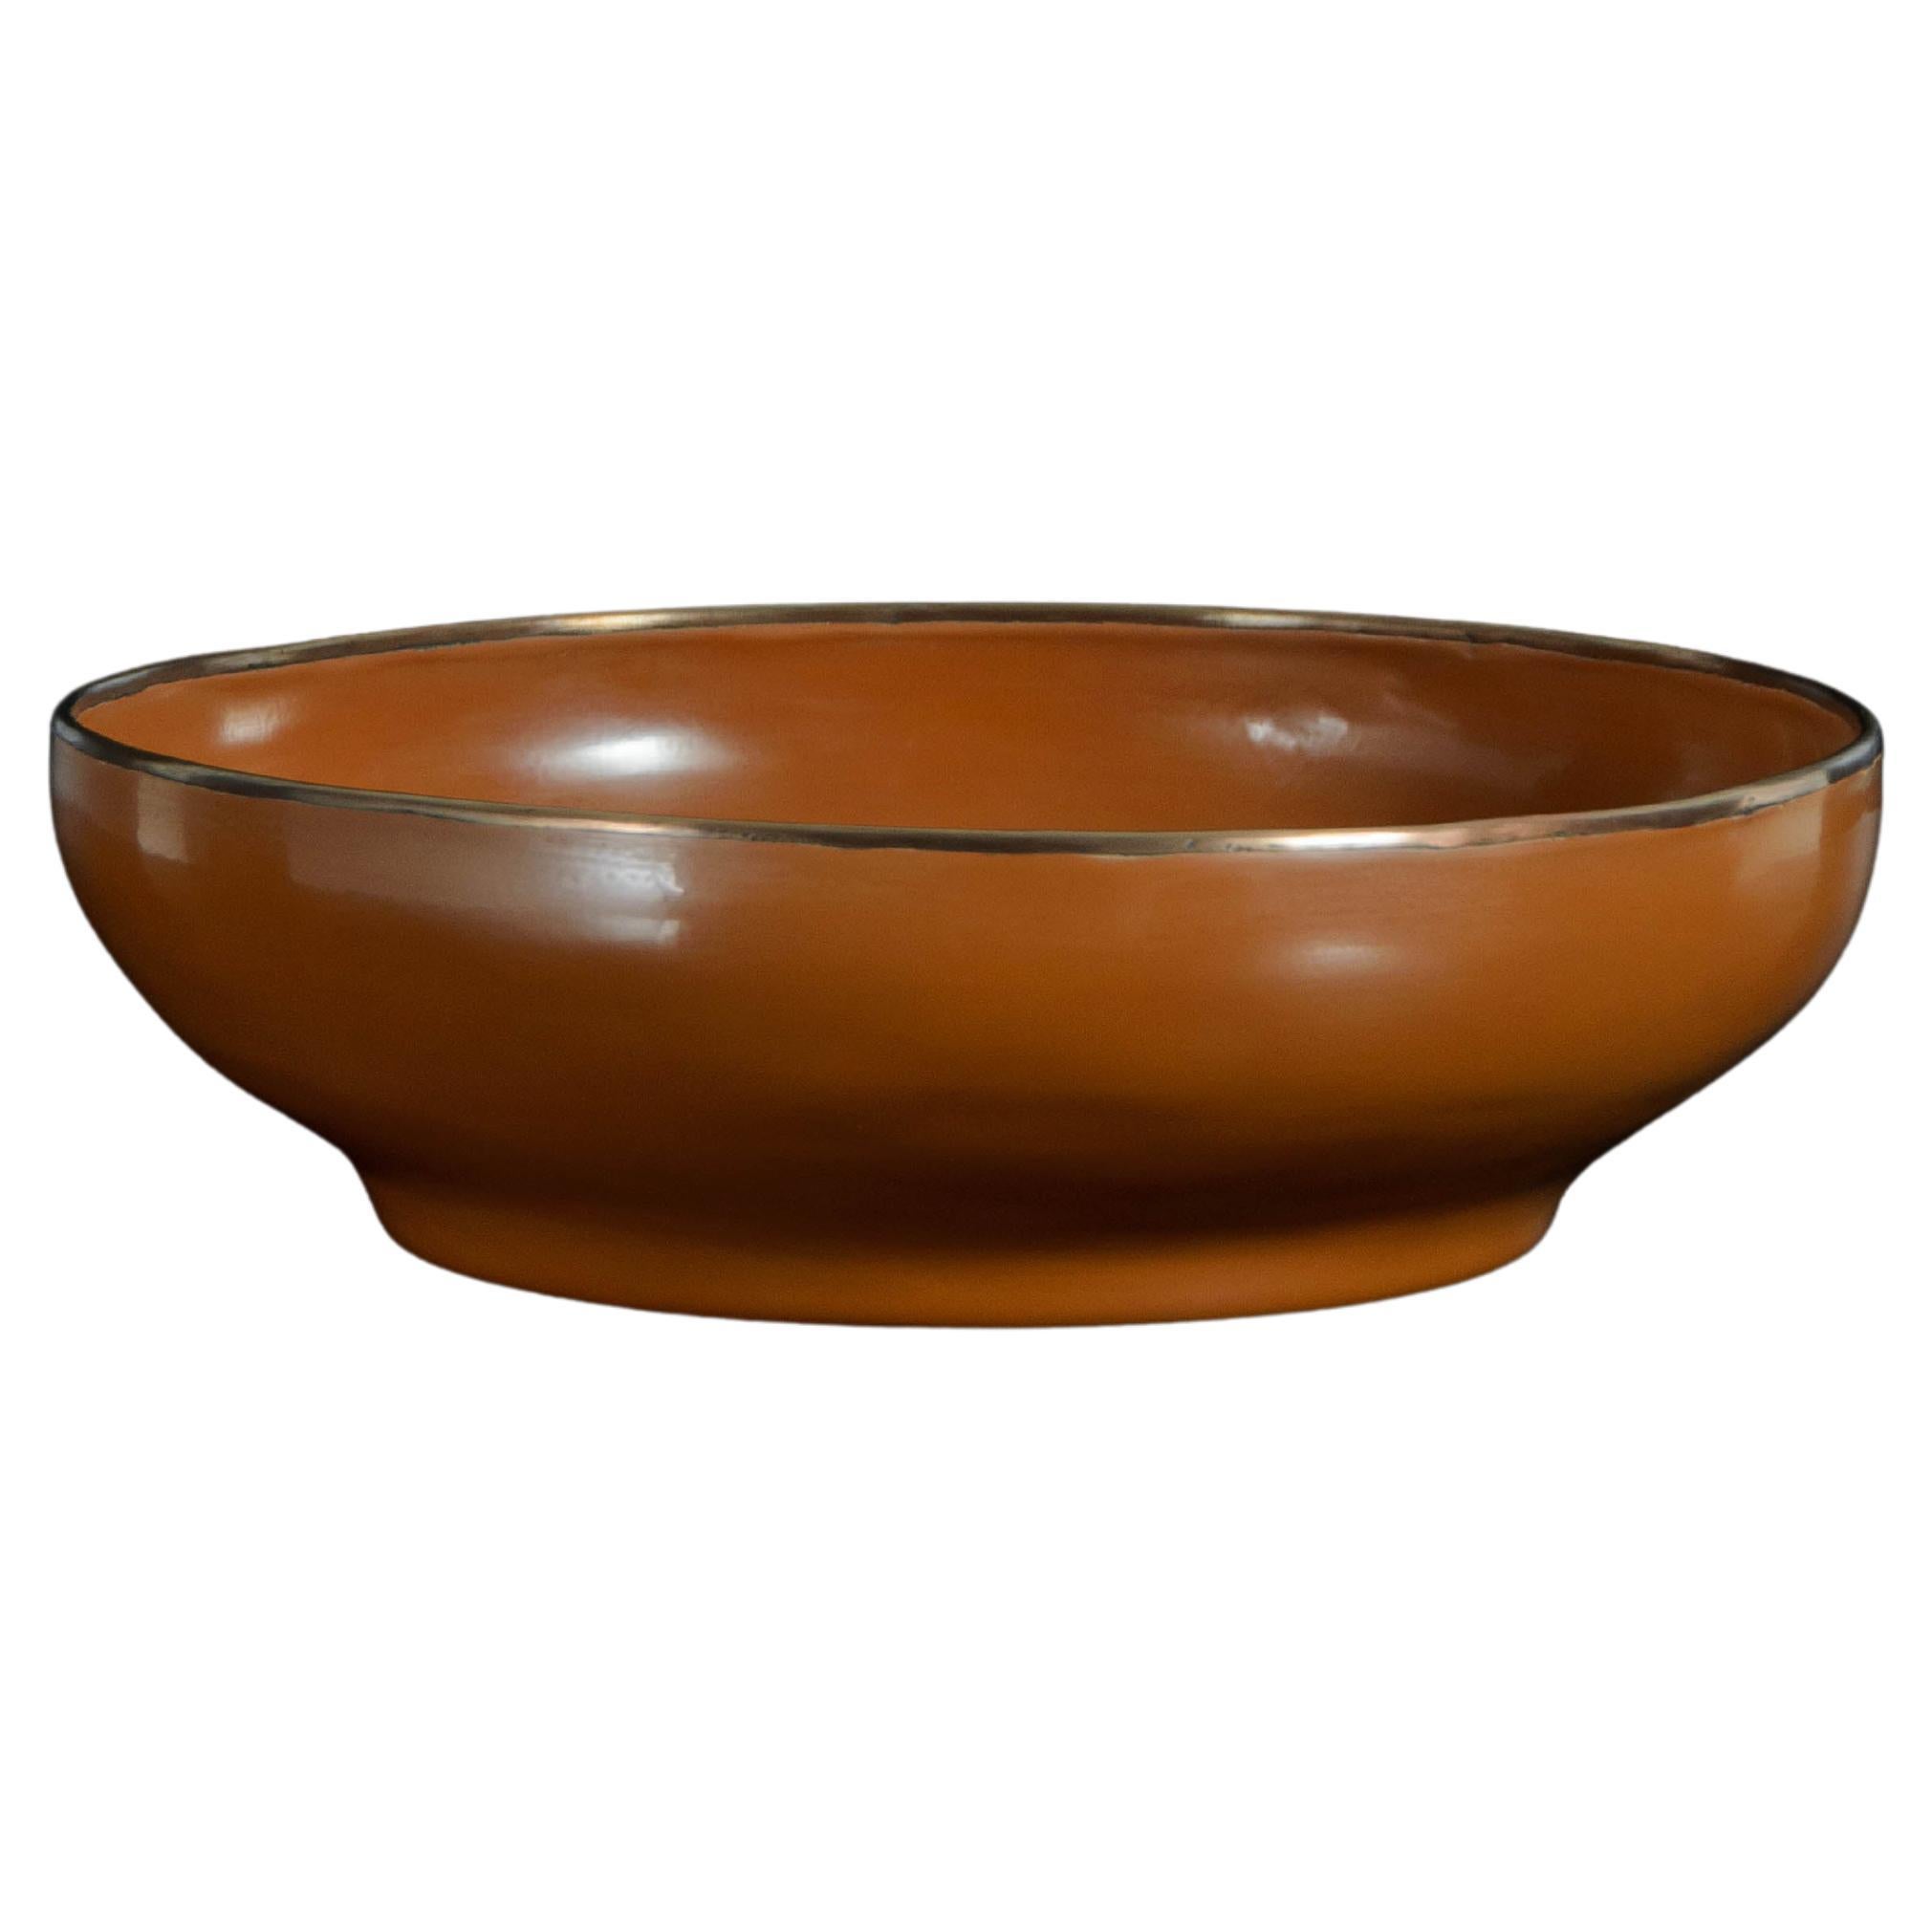 Contemporary Large Footed Bowl W/ Copper Rim in Mila Lacquer by Robert Kuo For Sale